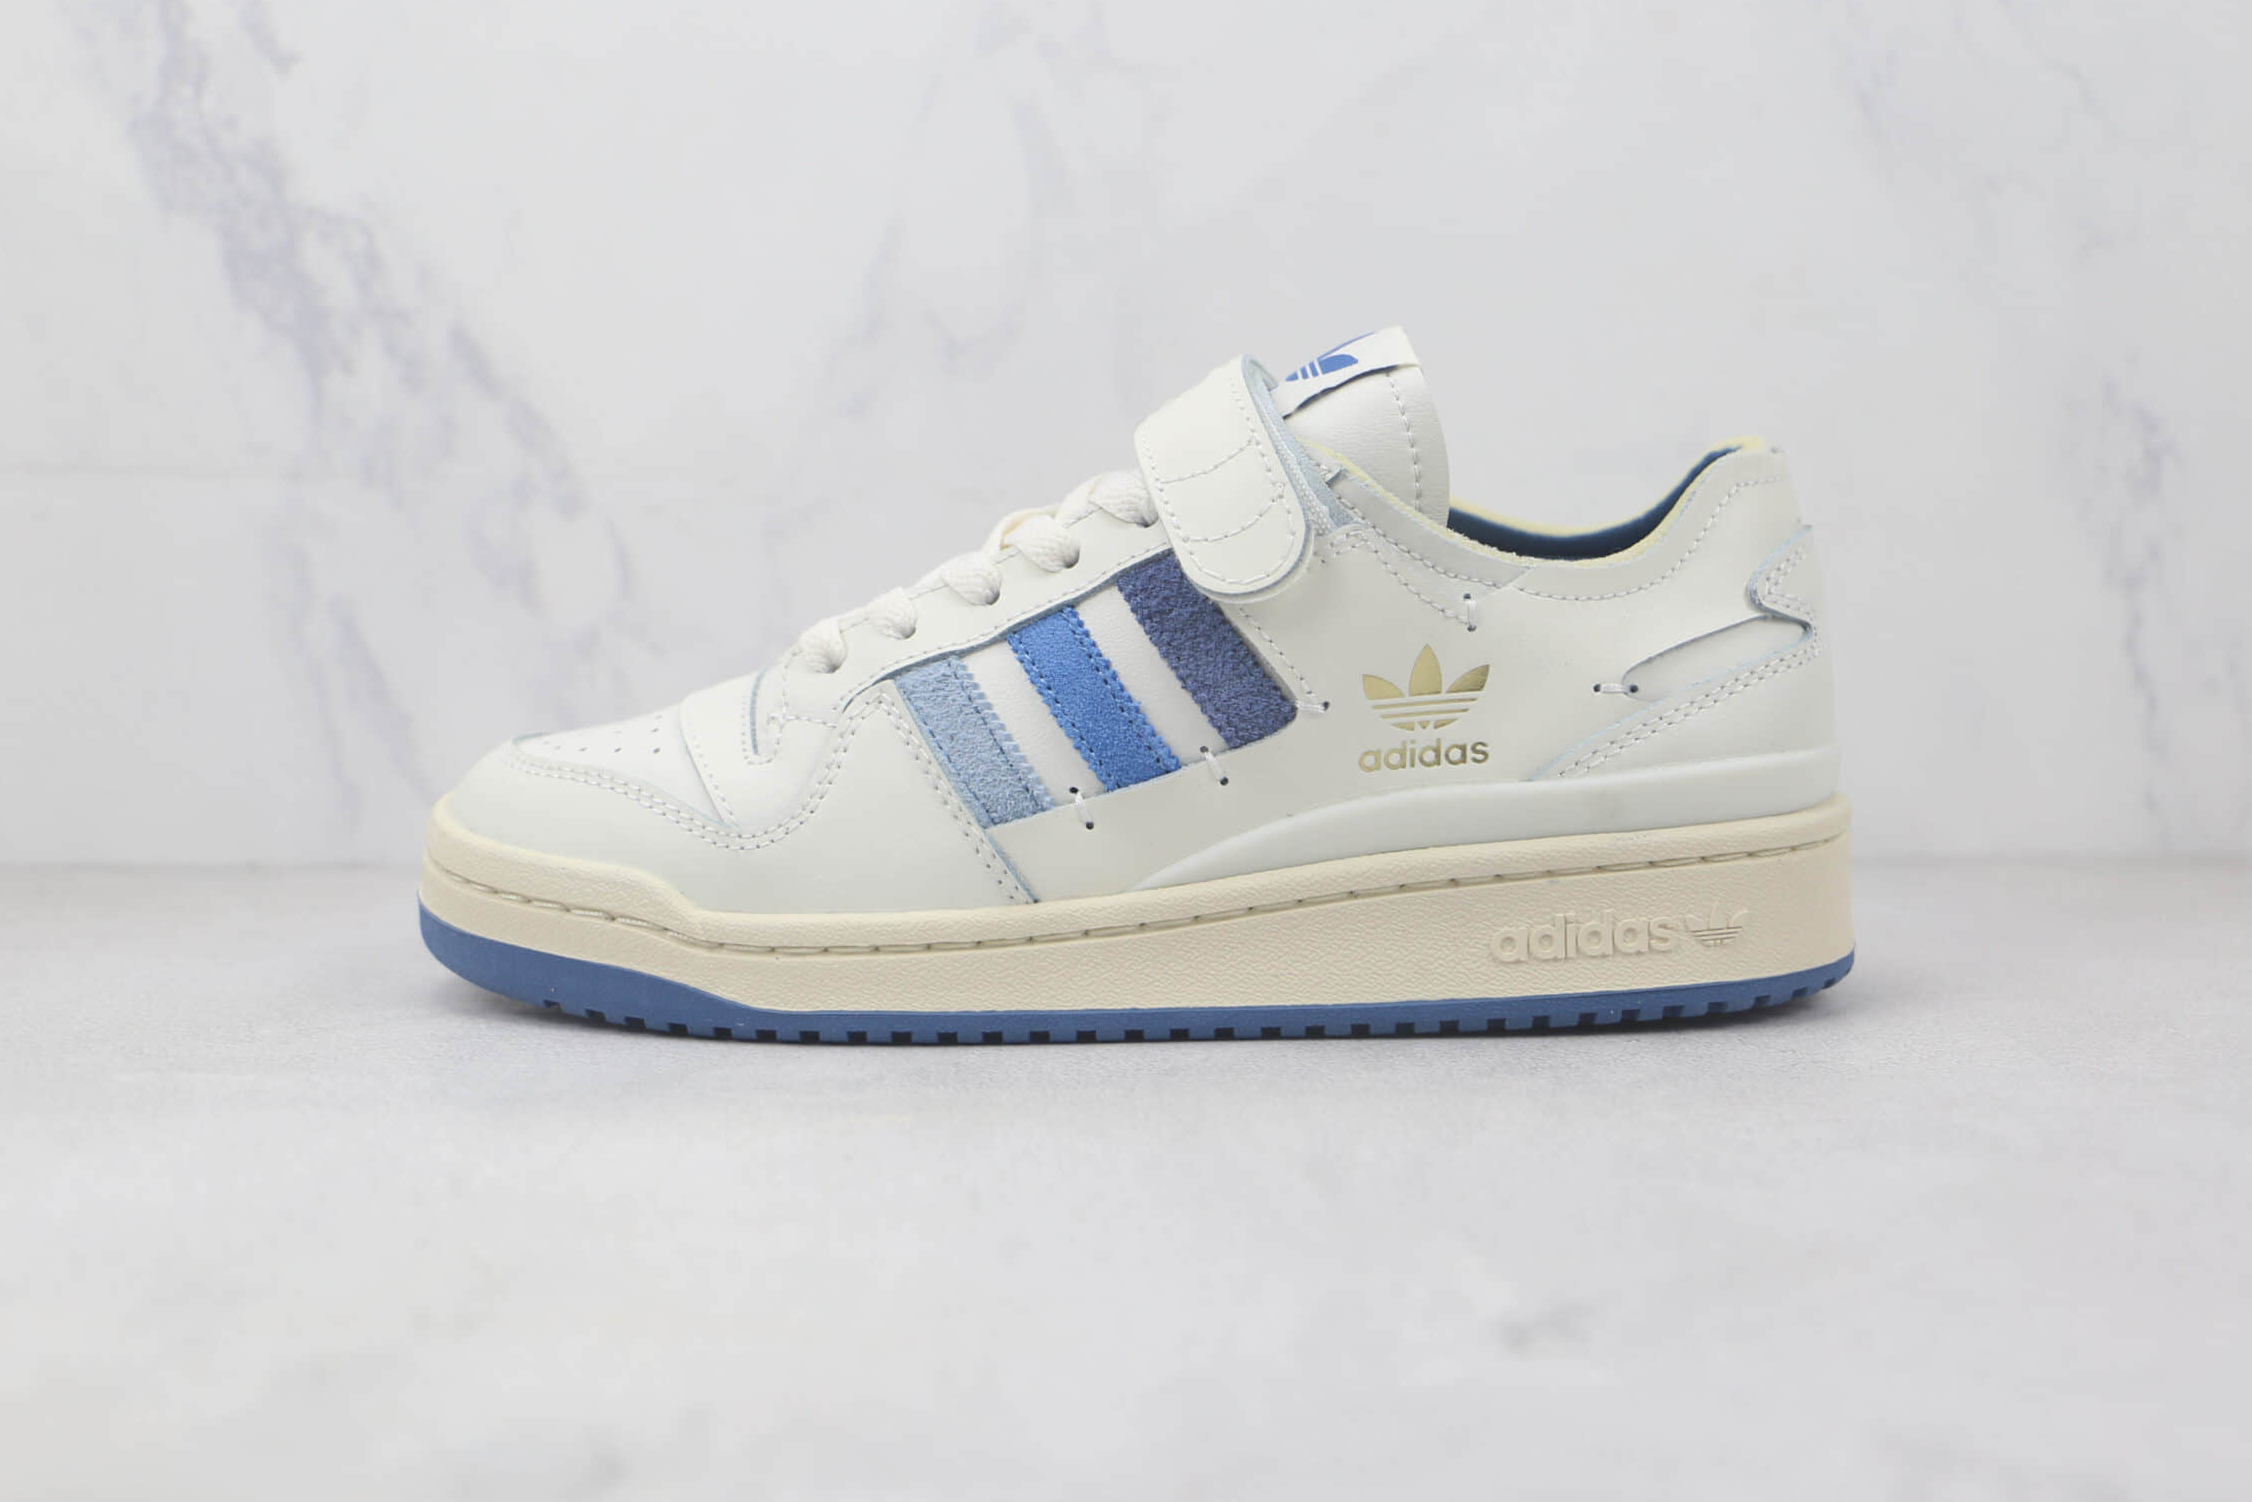 Adidas Forum 84 Low 'White Altered Blue' - Sleek and Stylish Footwear